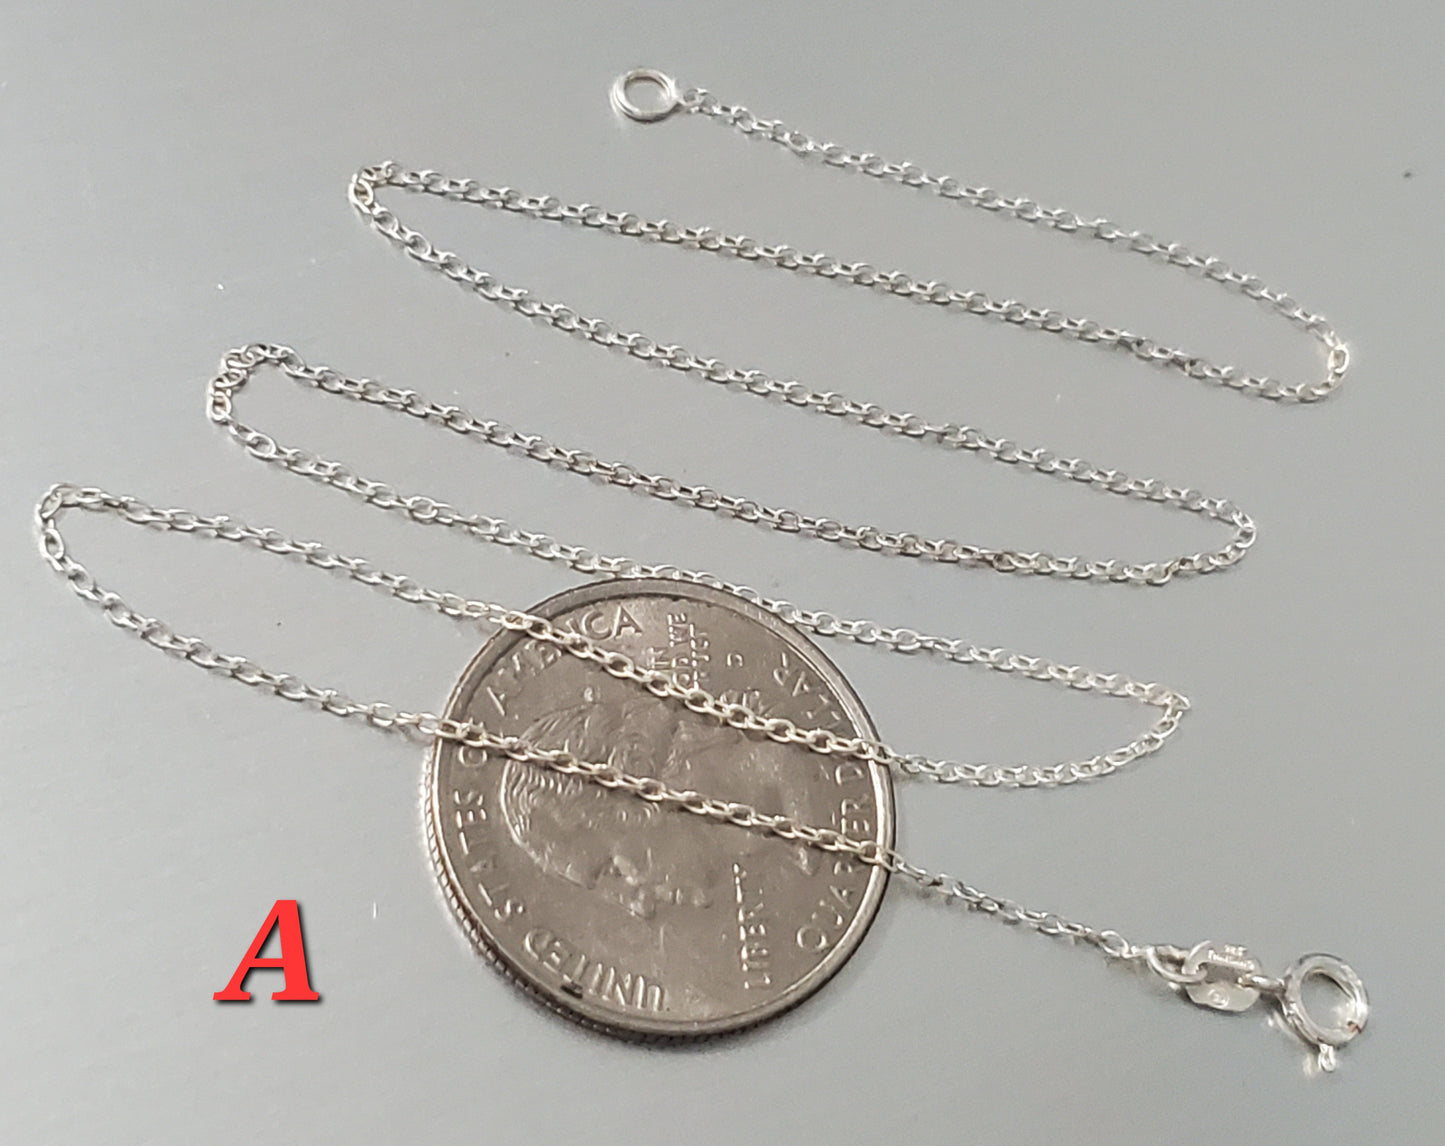 16 Inch Sterling Silver Chains $5 Choice